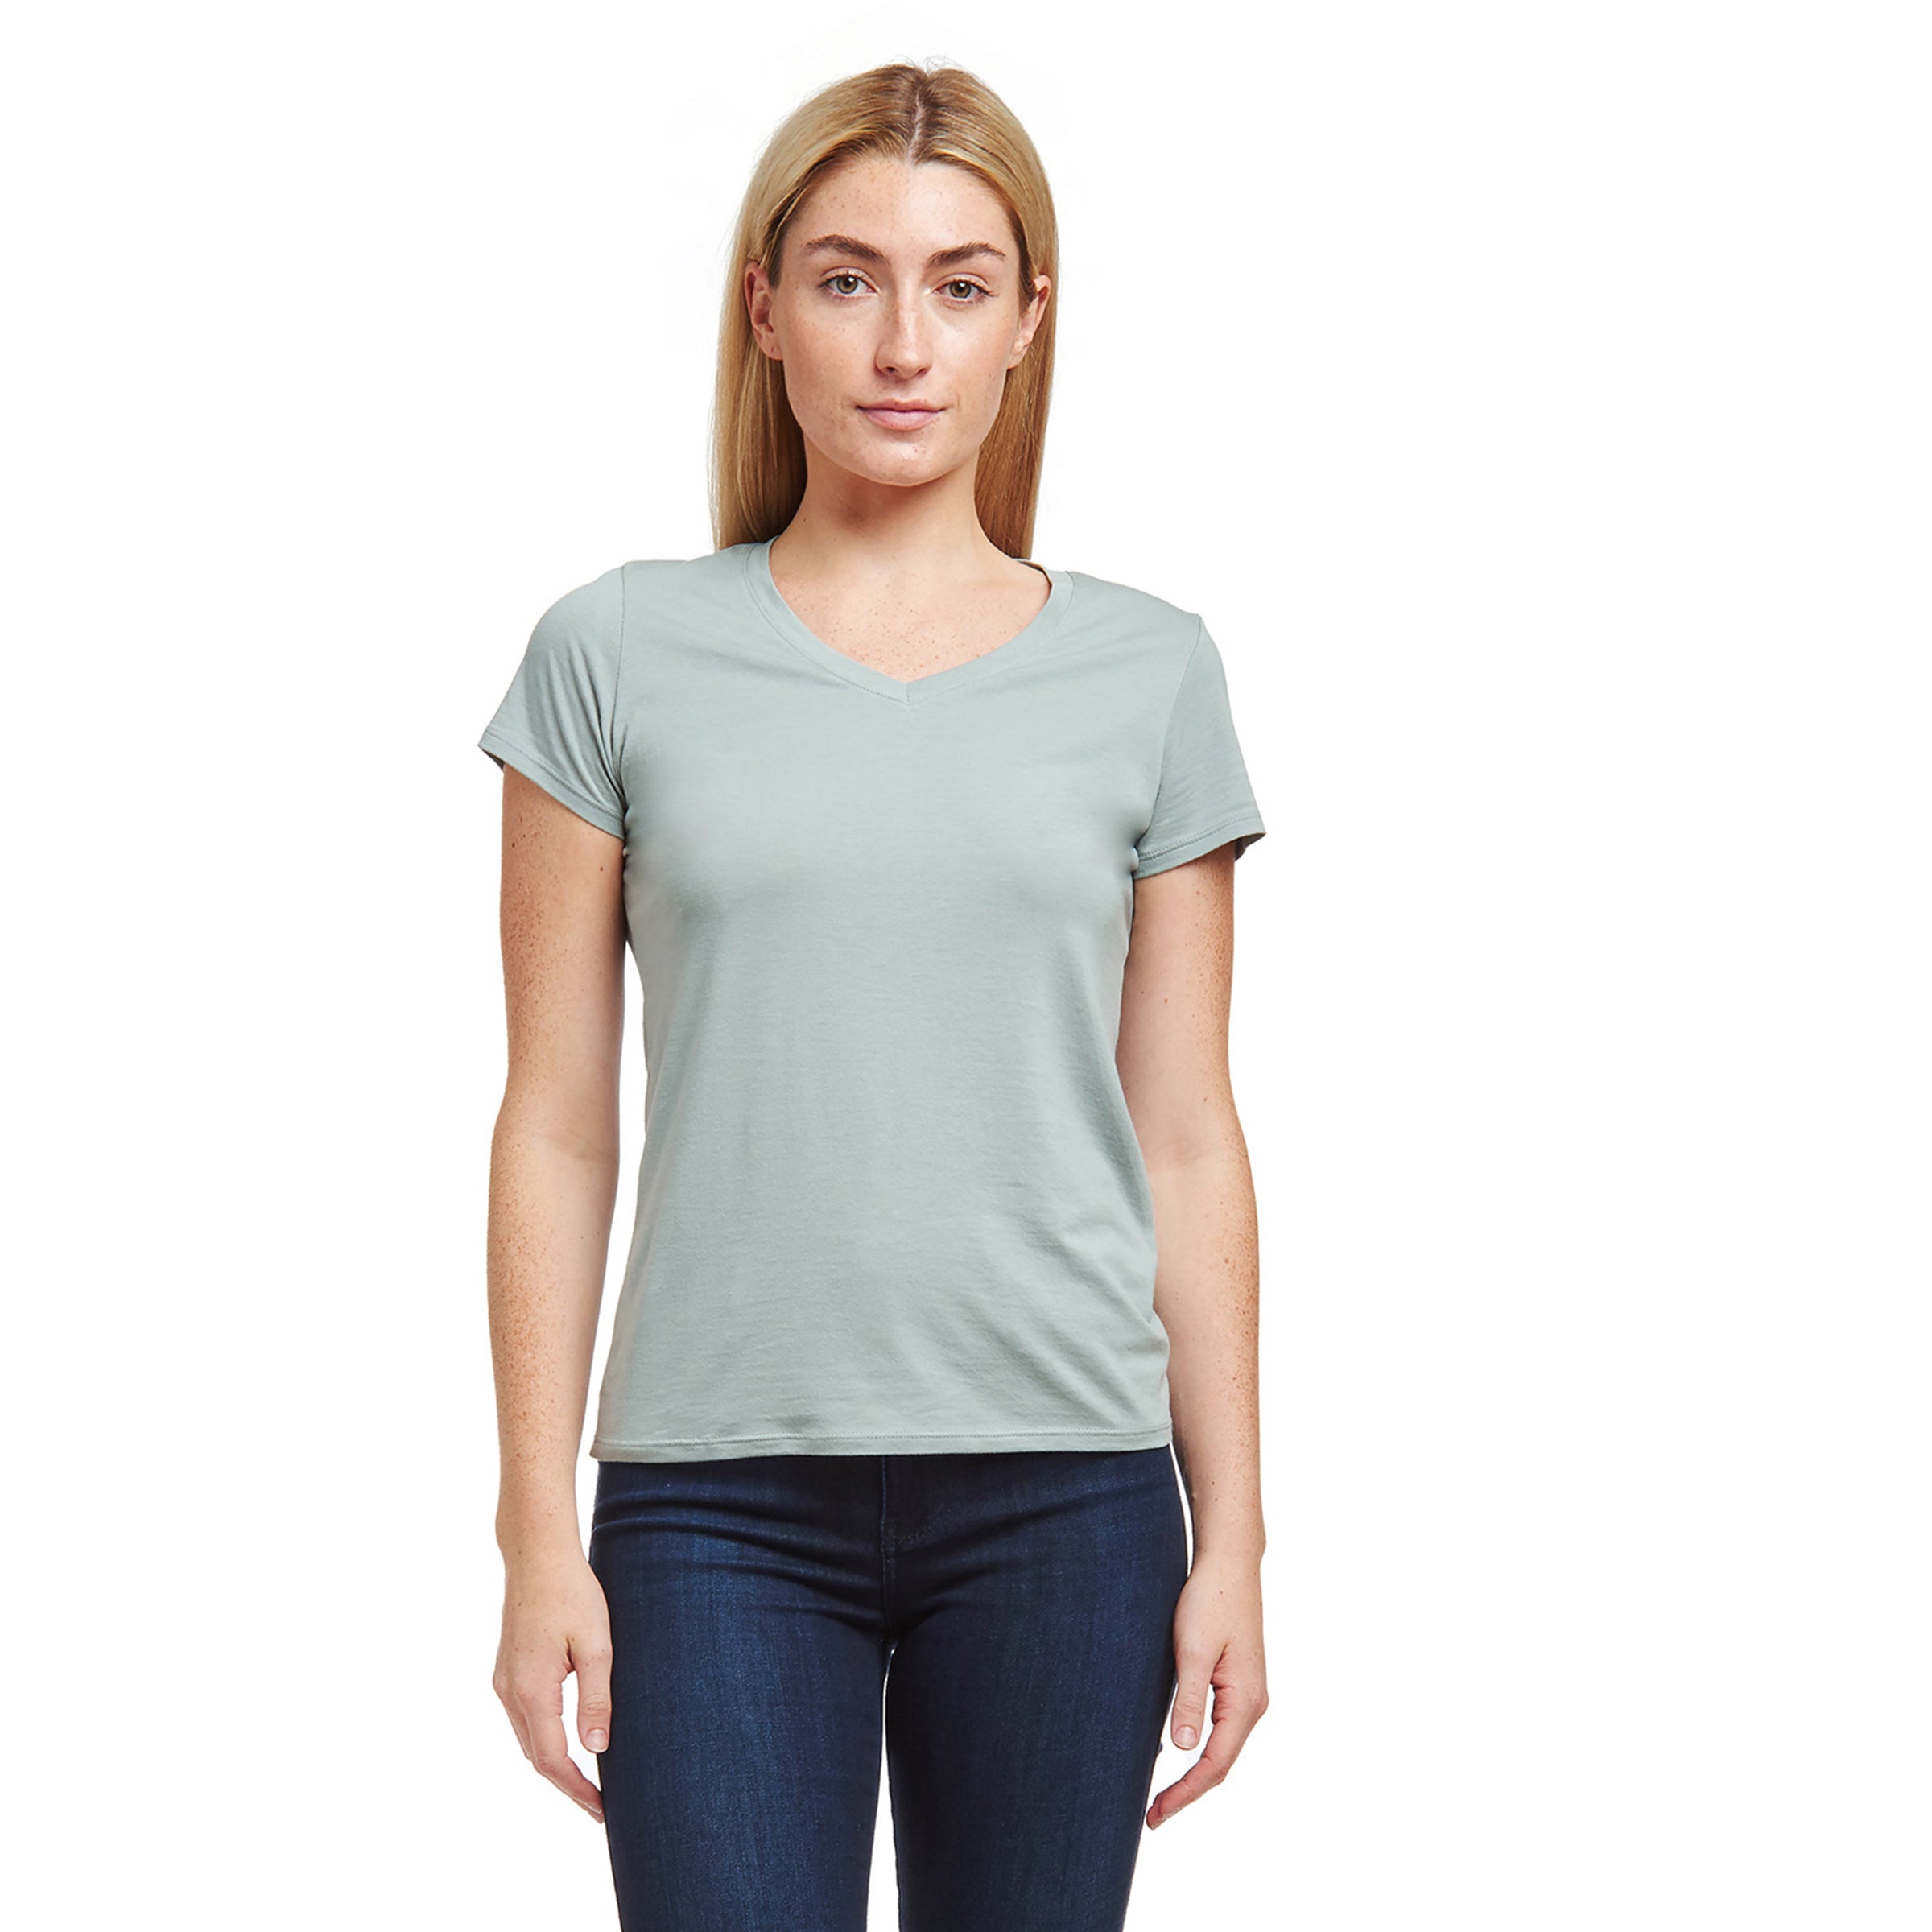 Women wearing Vine Fitted V-Neck Marcy Tee